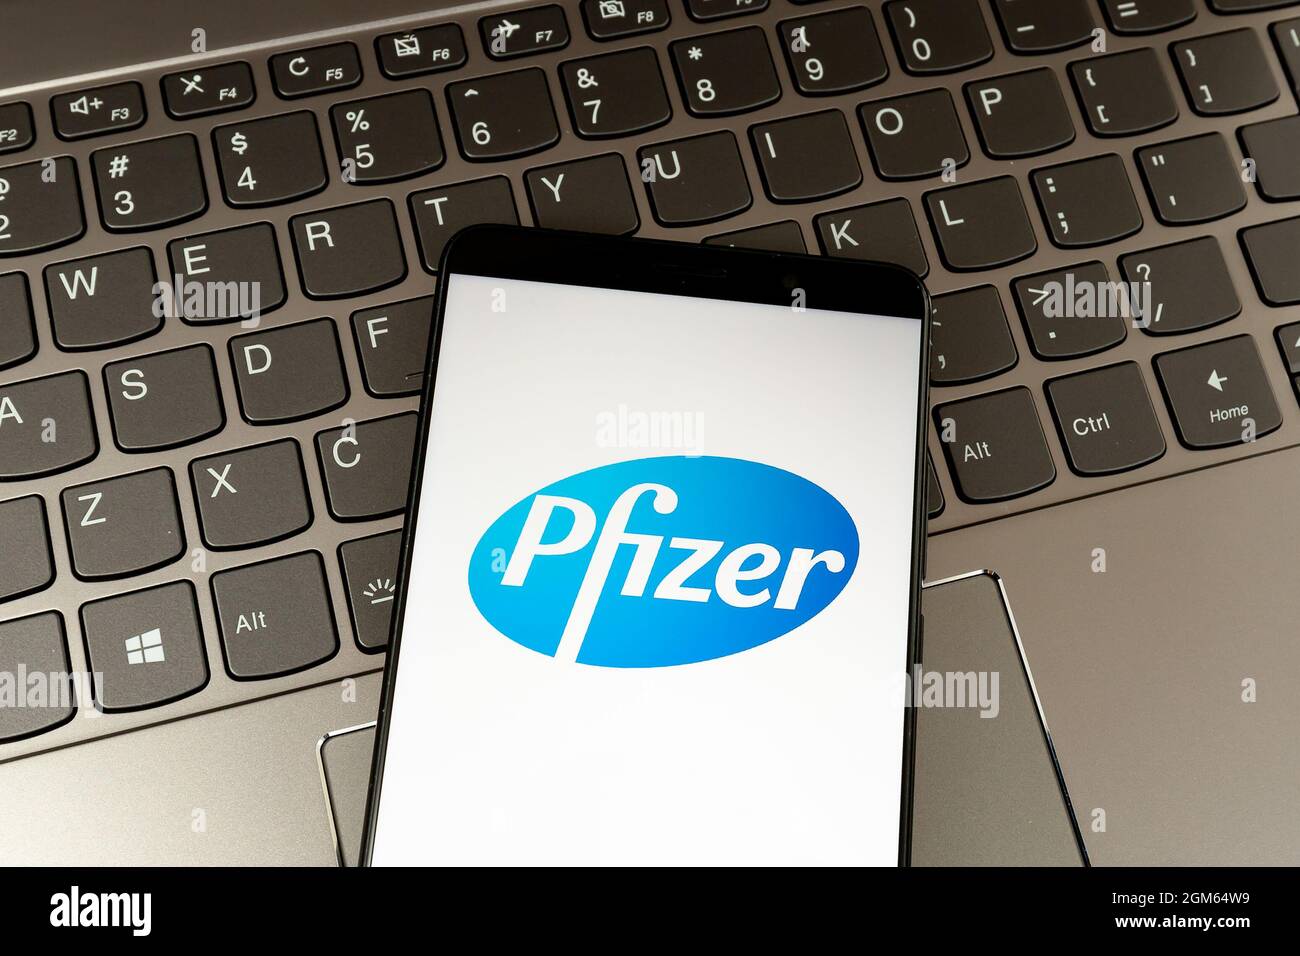 Toronto, Canada - March 18, 2021: Pfizer logo on smartphone screen with keyboard in background. Stock Photo